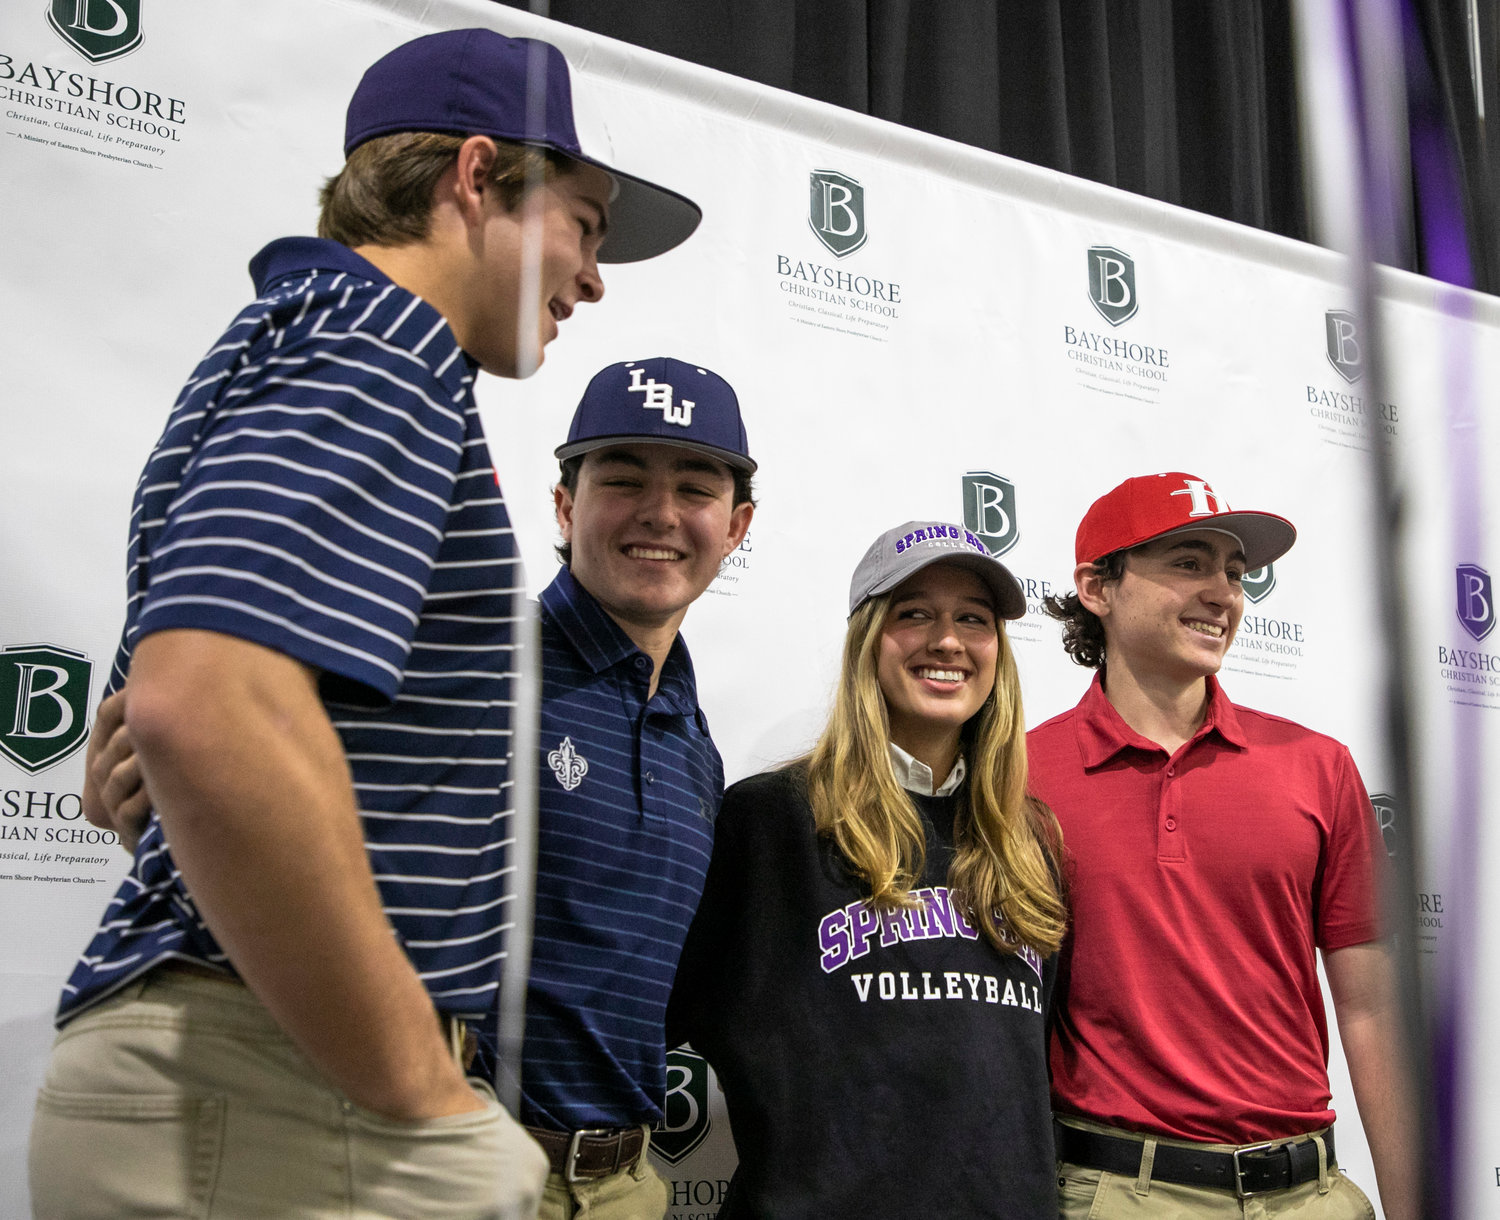 Bayshore Christian School hosted its largest athletic signing ceremony in history Wednesday afternoon, Nov. 30, when John Malone, Streed Crooms, Ashlyn Whiteside and Mikael Bryant put pen to paper to cement commitments to their college teams. The four athletes increased the Eagles’ total collegiate signees to seven.